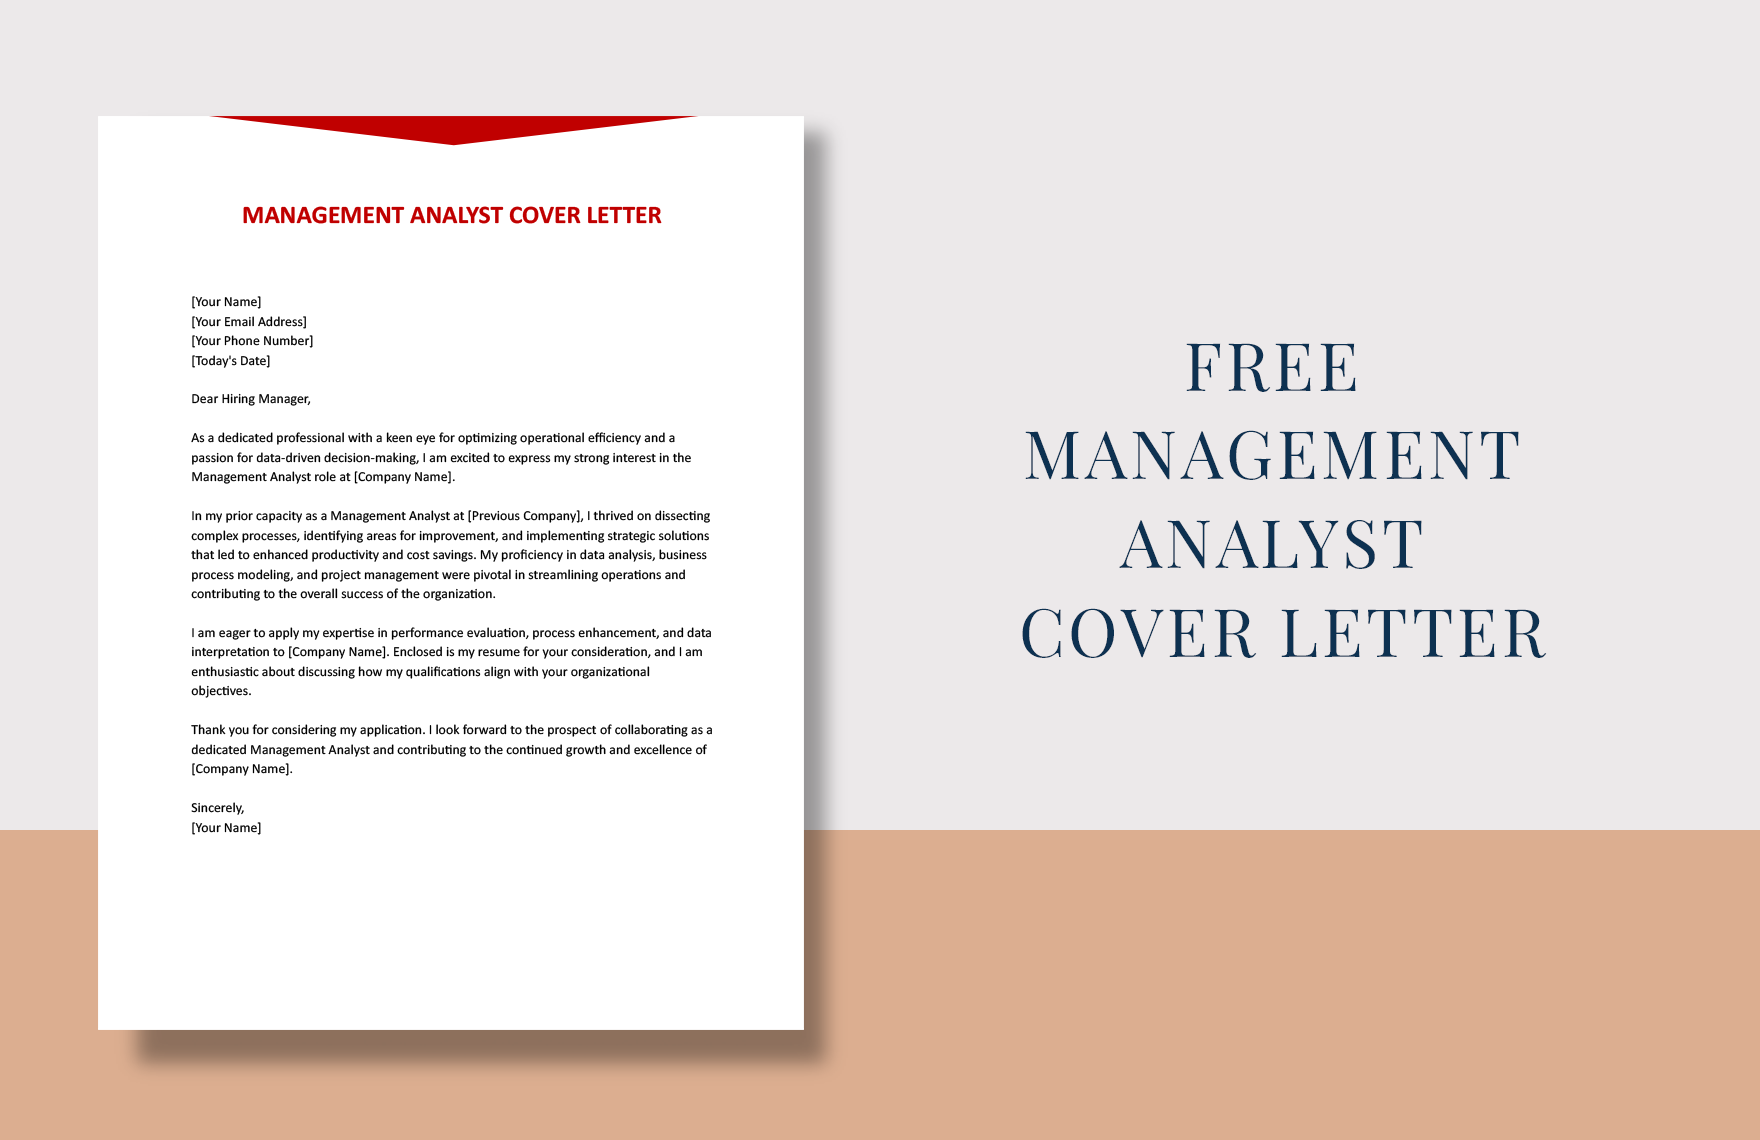 Management Analyst Cover Letter